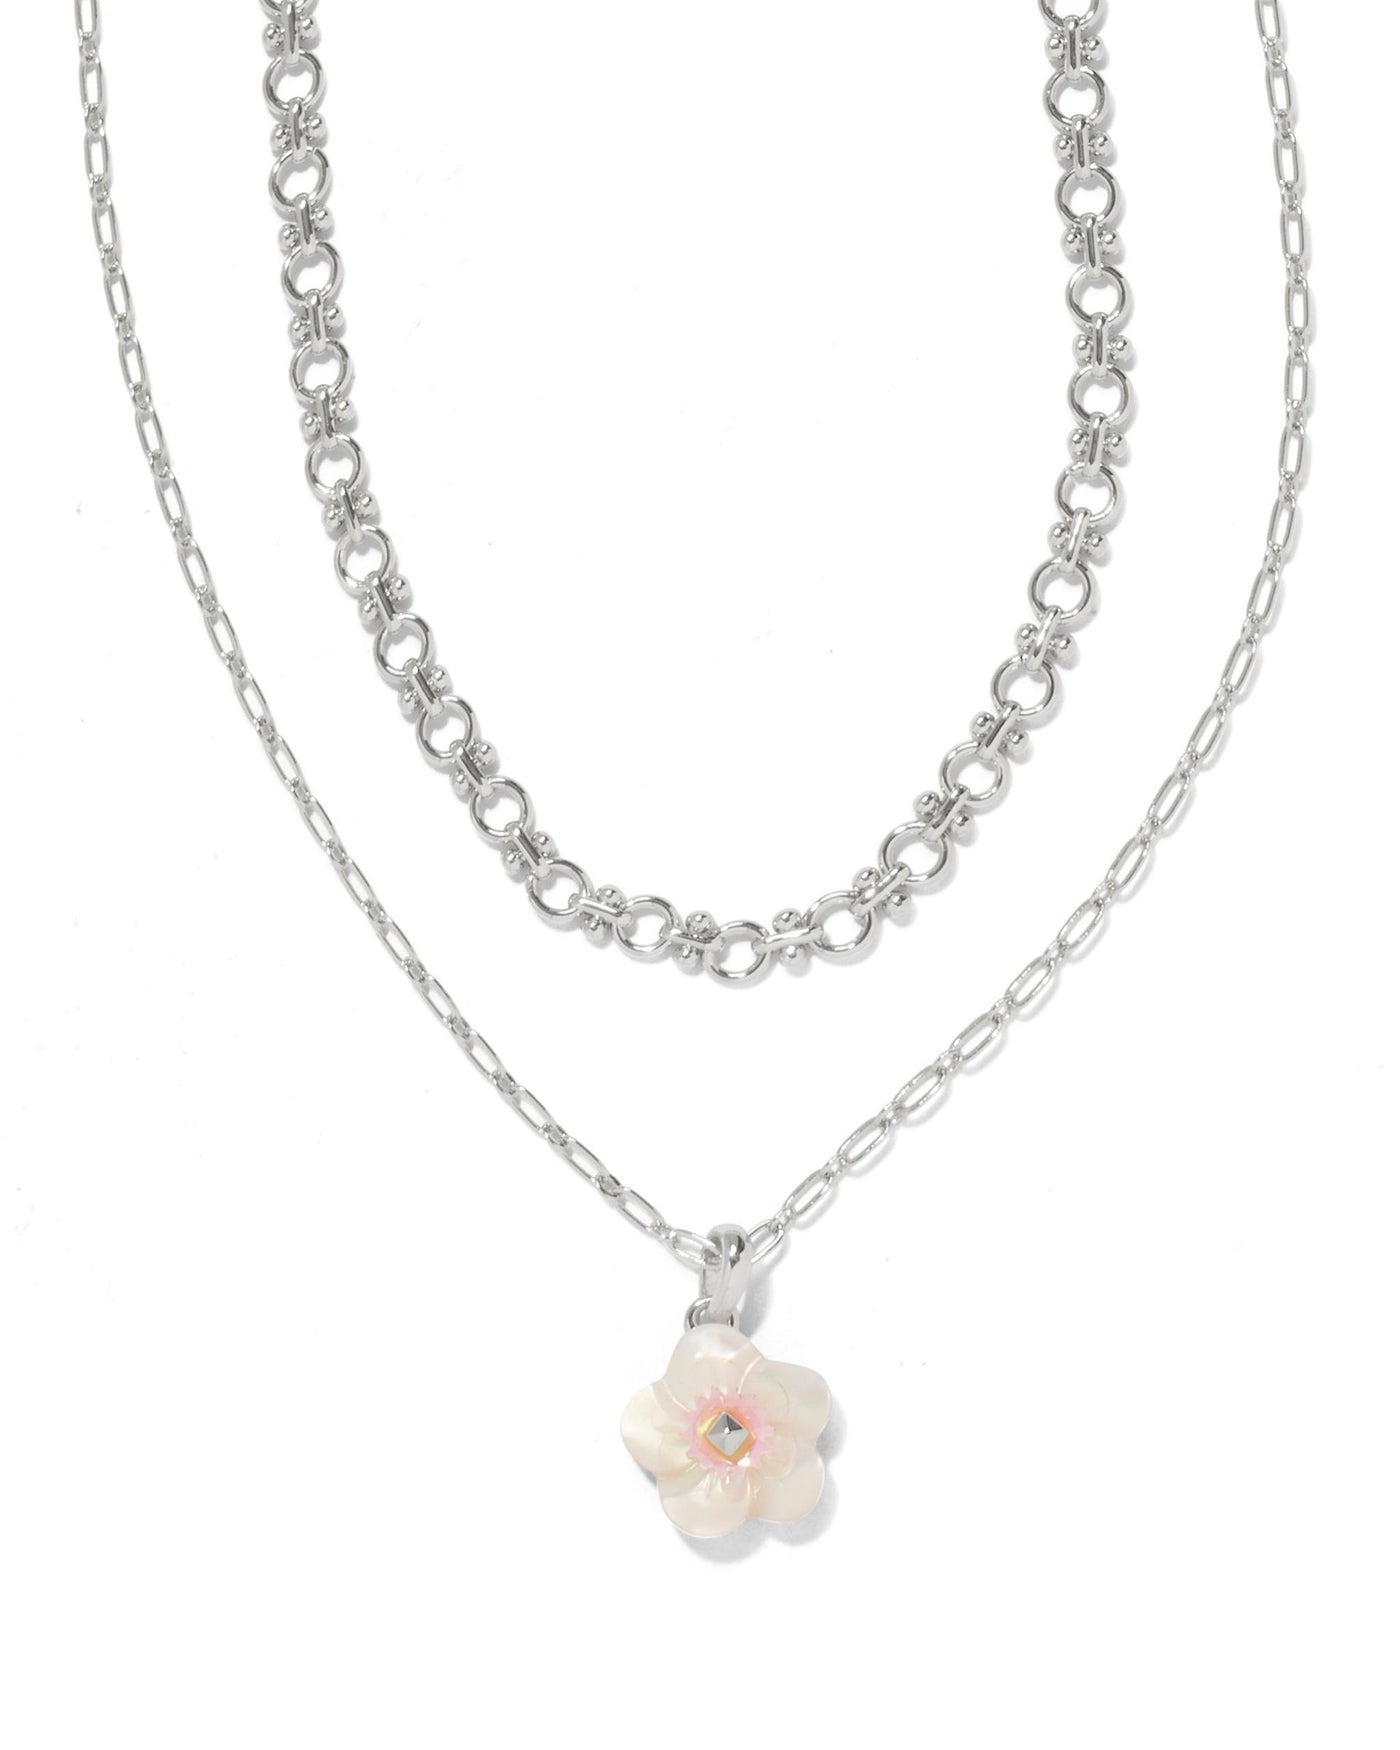 Silver Tone Necklace by Kendra Scott